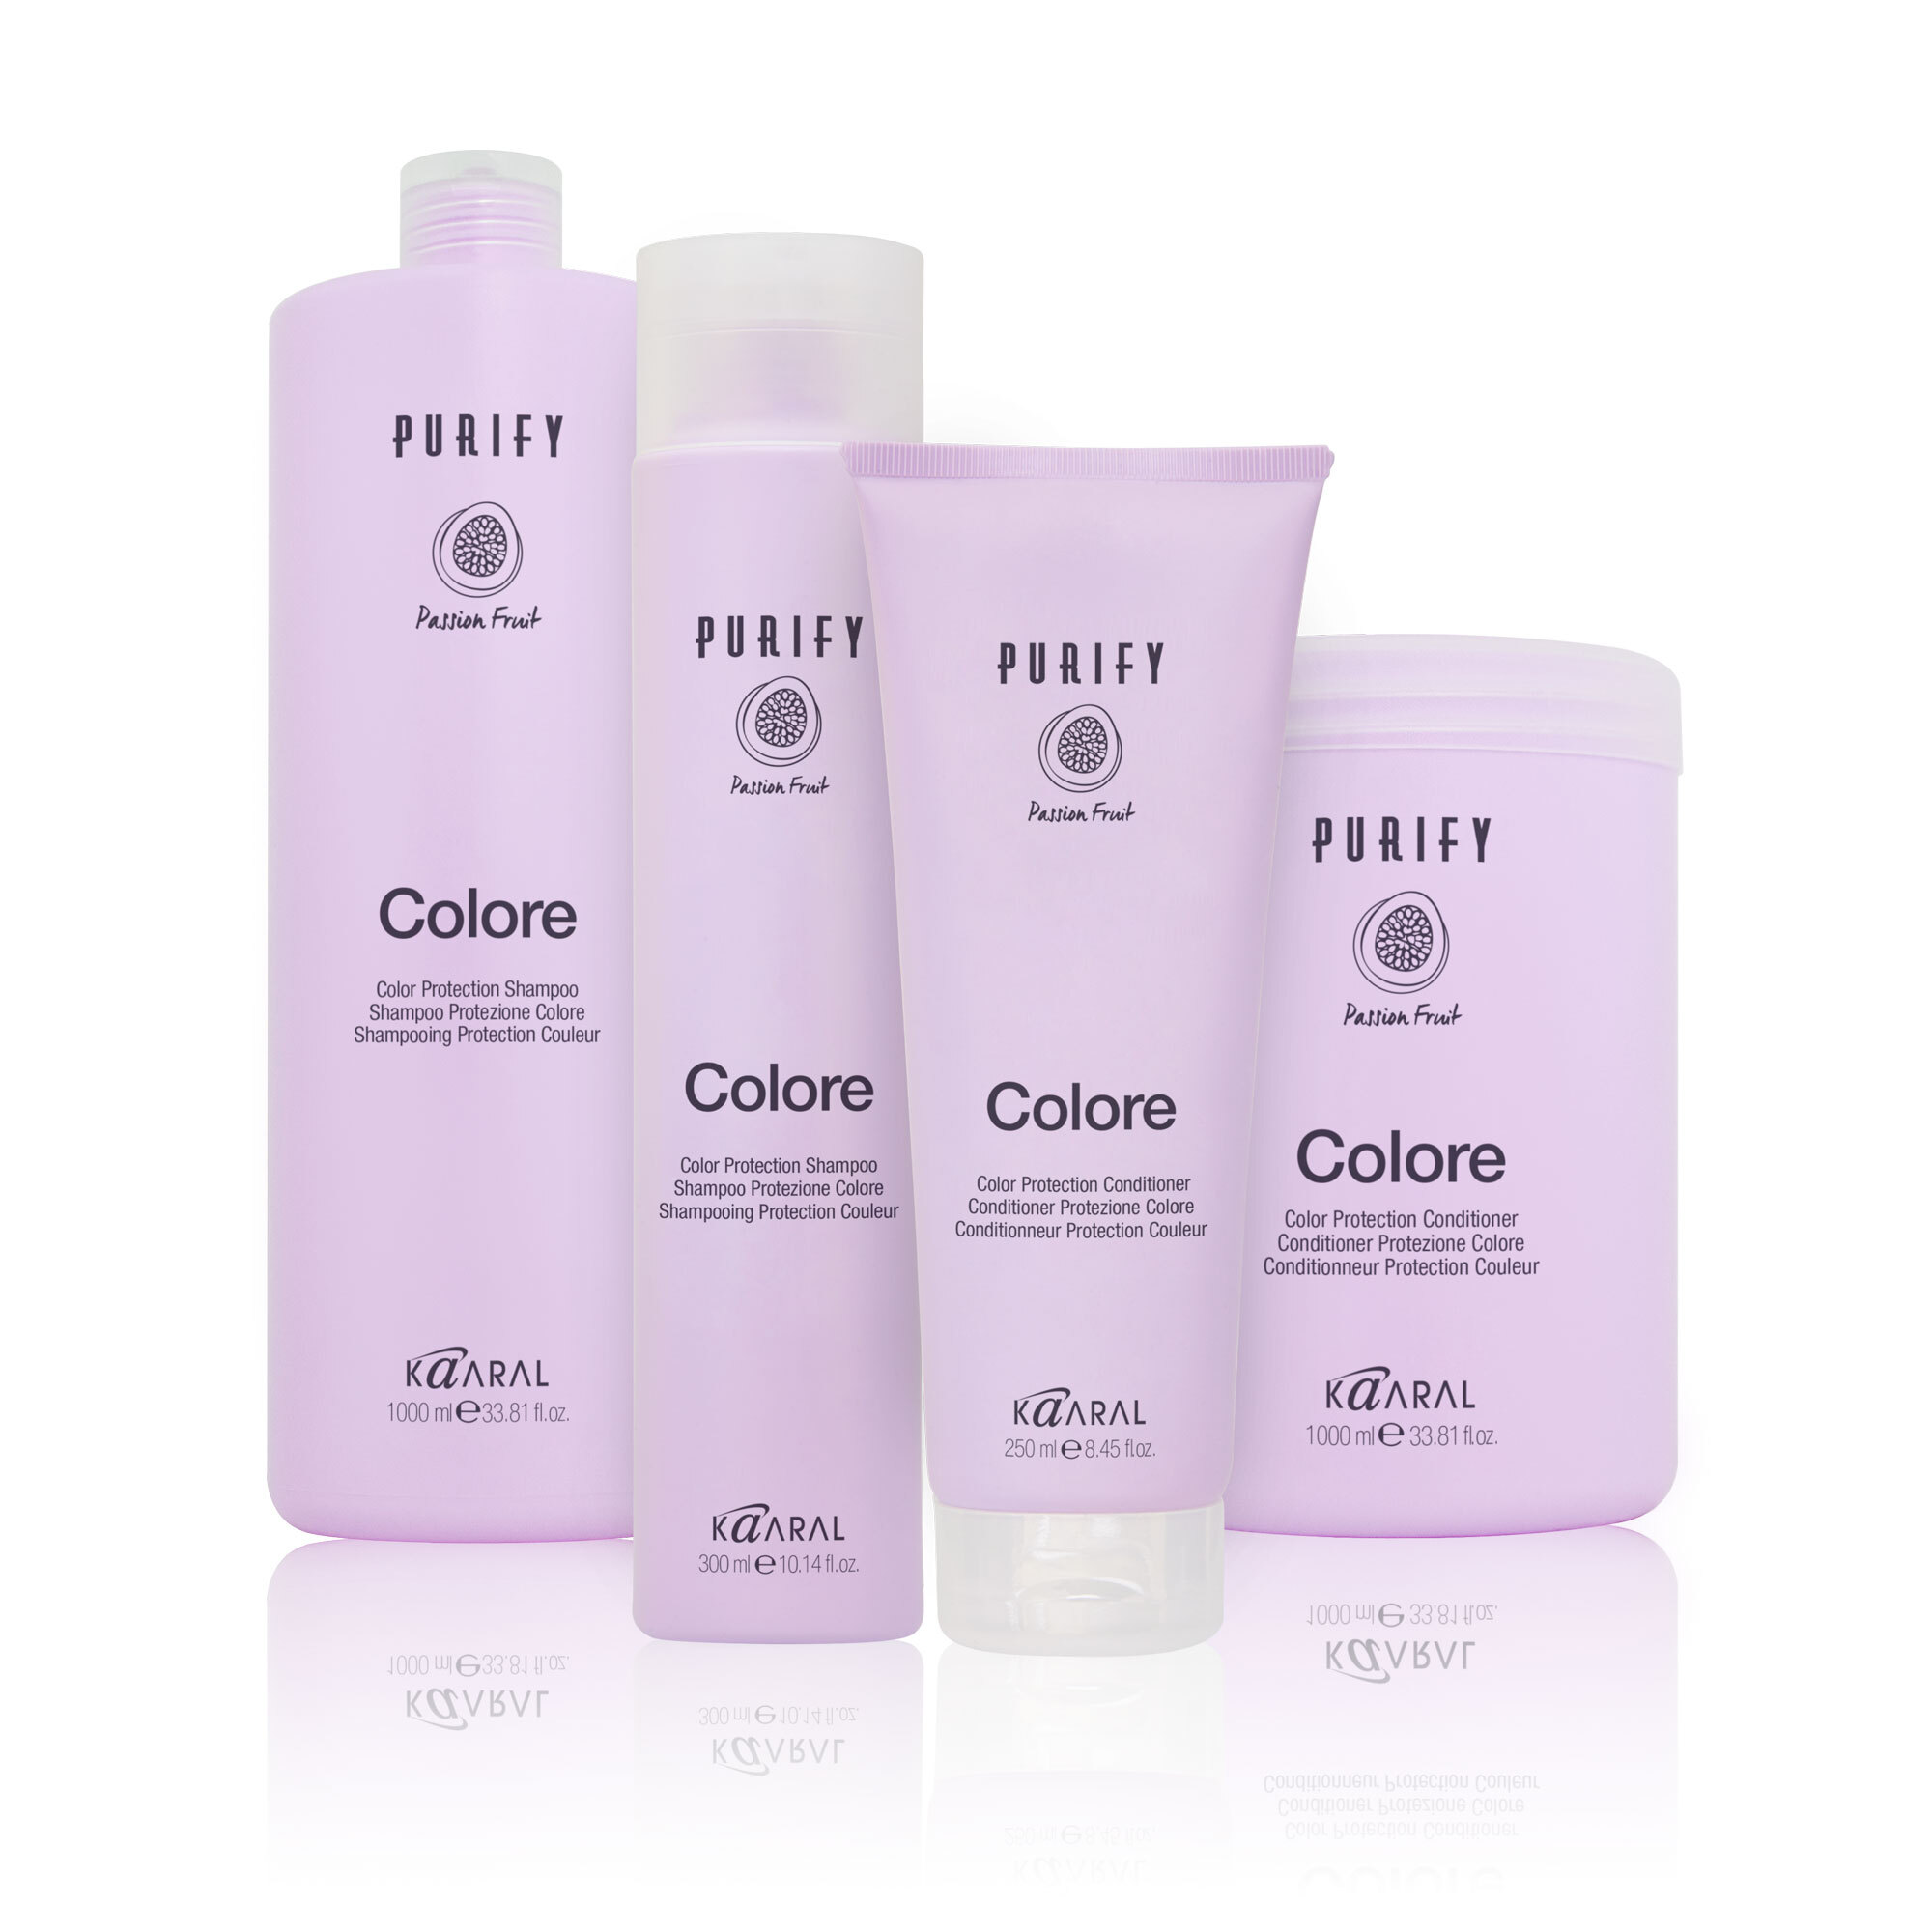 Kaaral Purify Colore Haircare Promotion